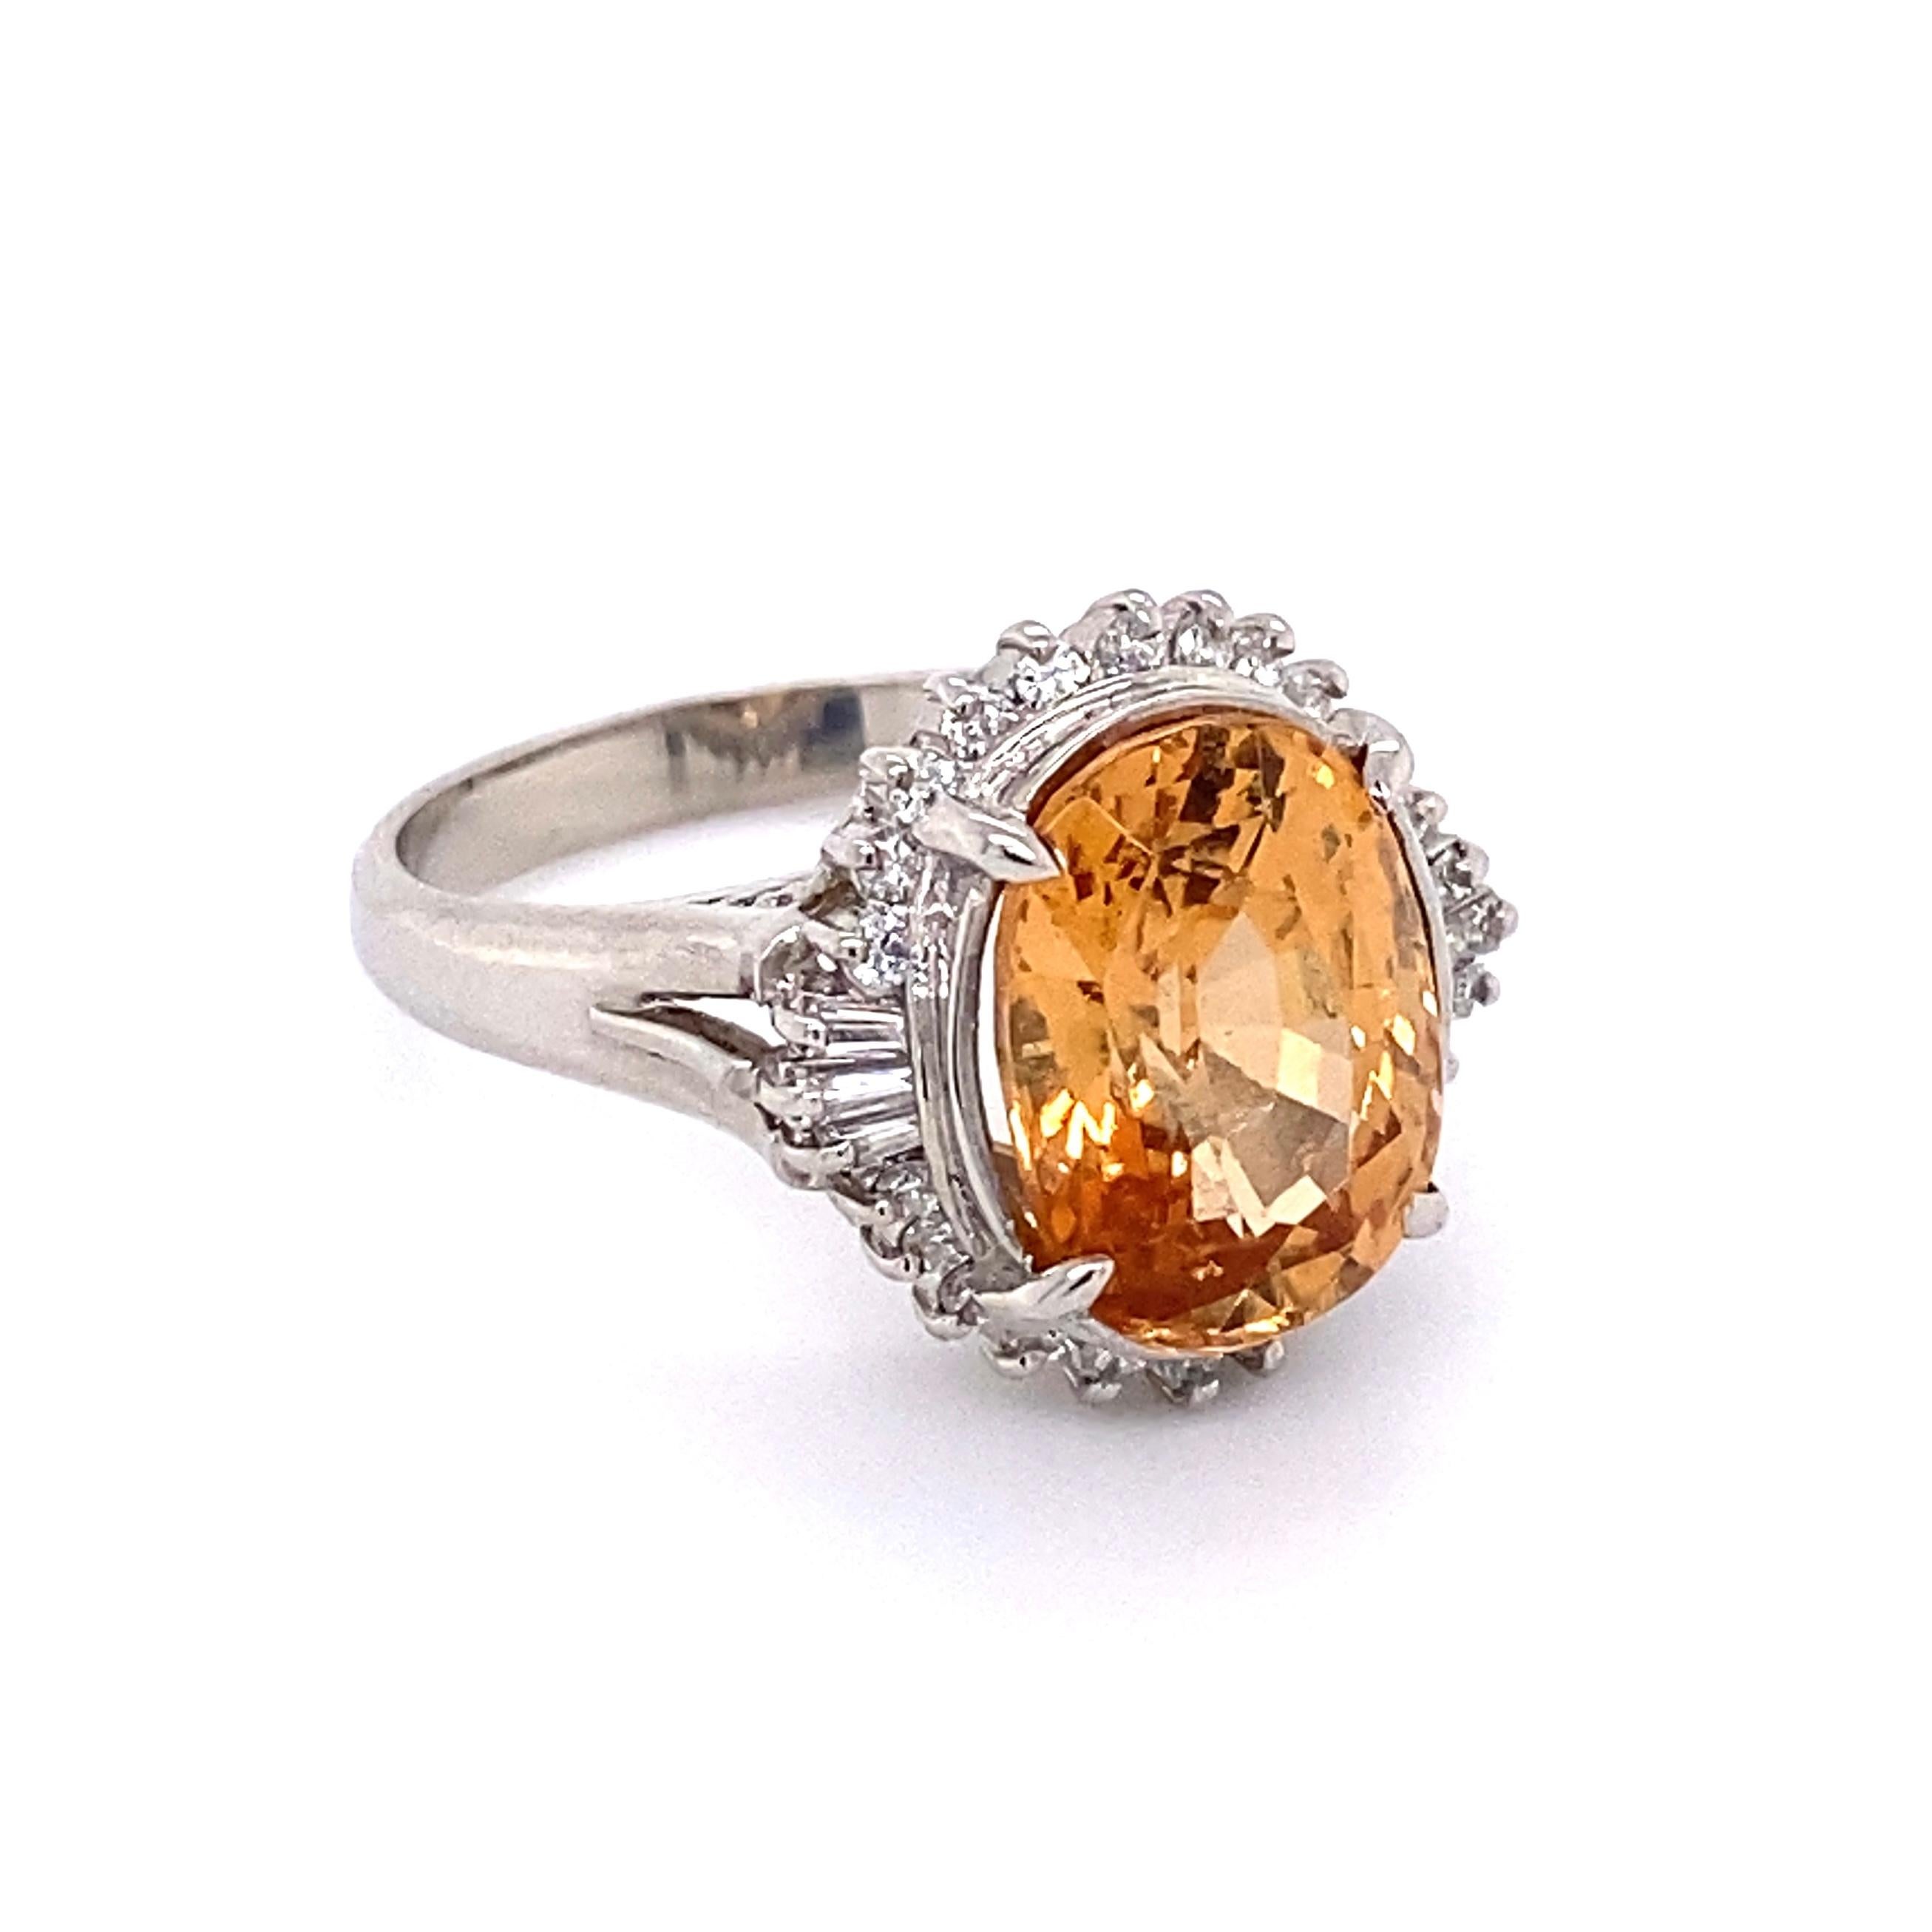 Simply Beautiful! Finely detailed Imperial and Diamond Platinum Cocktail Ring, center securely nestled with an Oval Imperial Topaz, approx. 4.93 Carat, surrounded by Diamonds, approx. 0.32tcw. Hand crafted Platinum mounting. Ring size 6.5, we offer